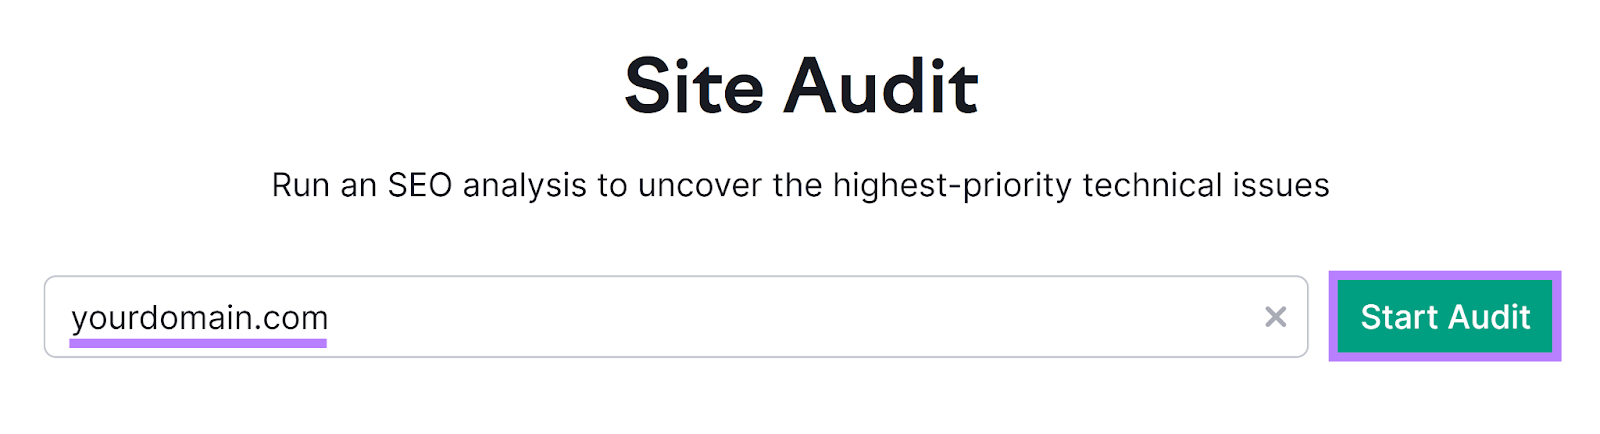 Site Audit tool start with domain entered and Site Audit button highlighted.